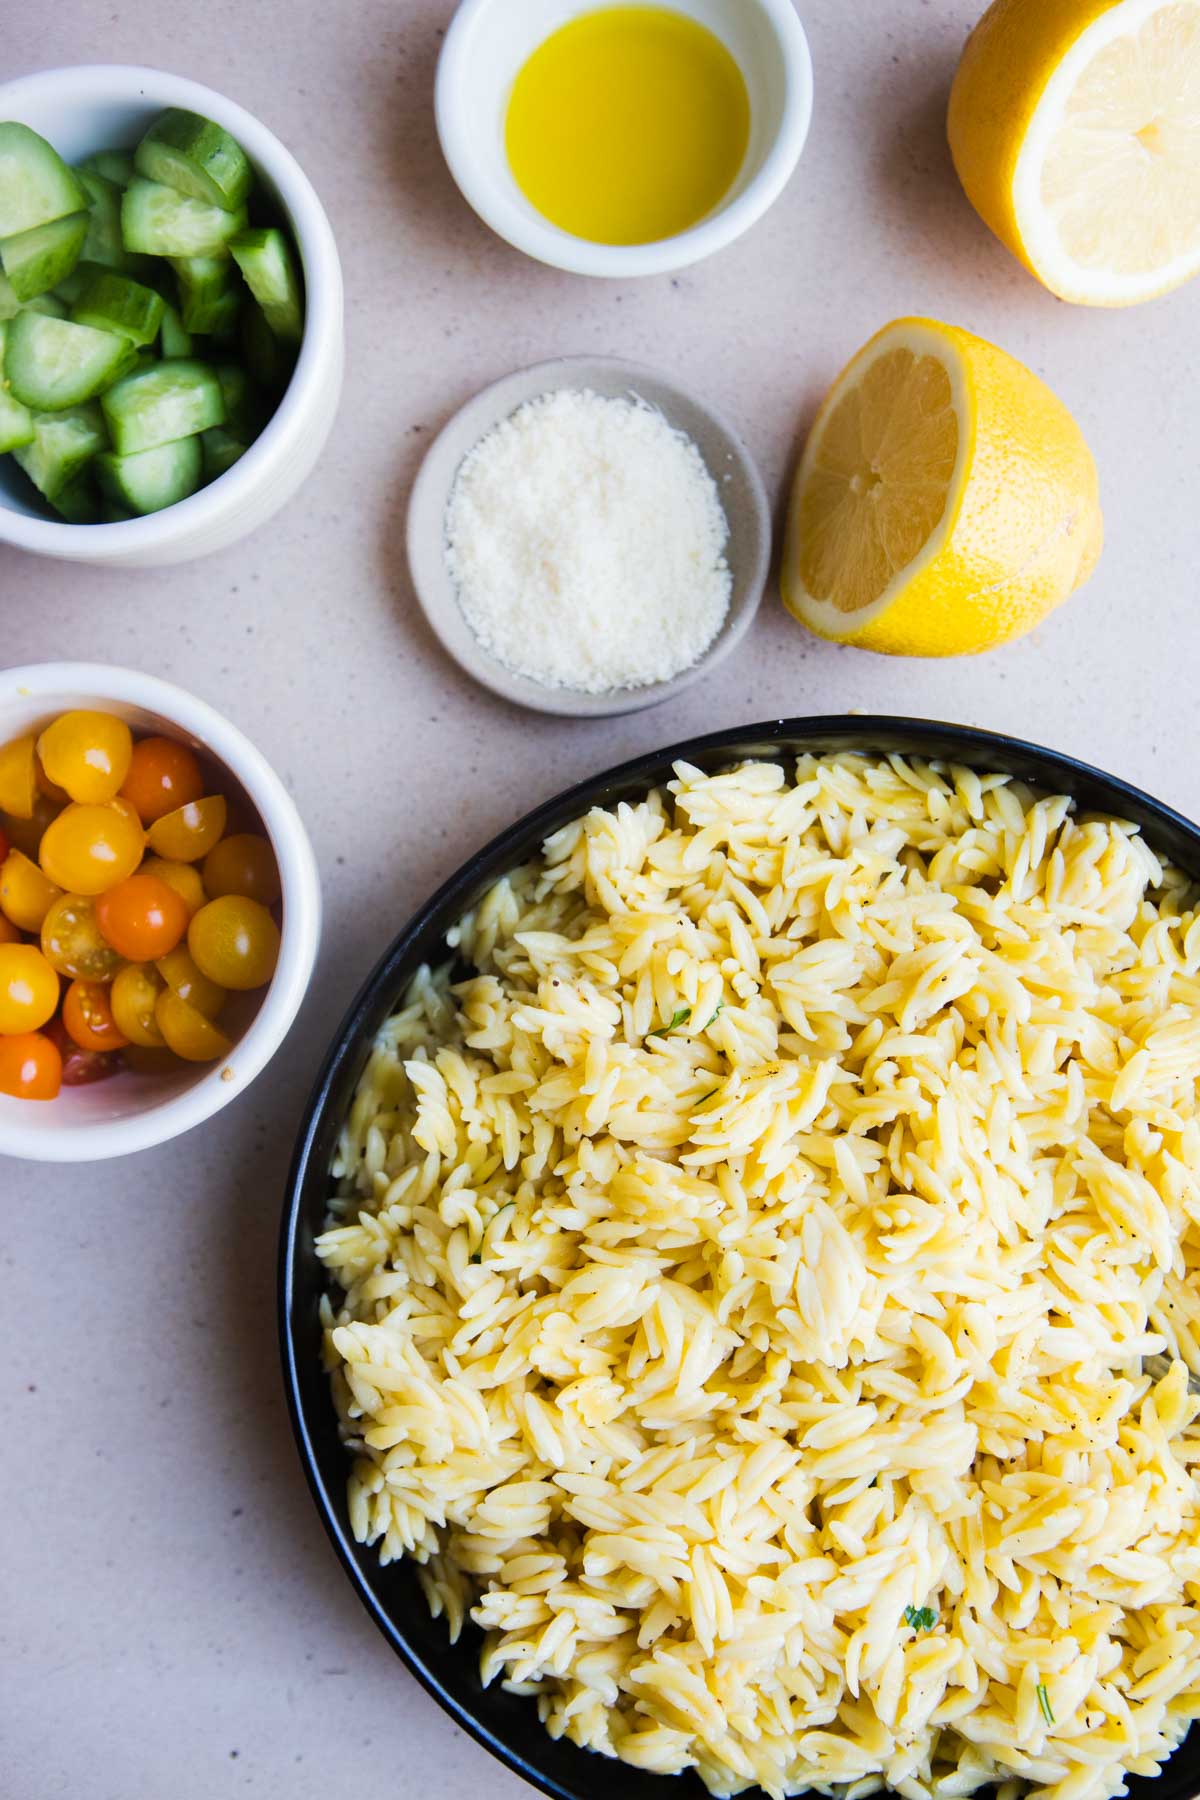 Ingredients shown are used to prepare a zesty lemon orzo salad to share as a side dish or salad.